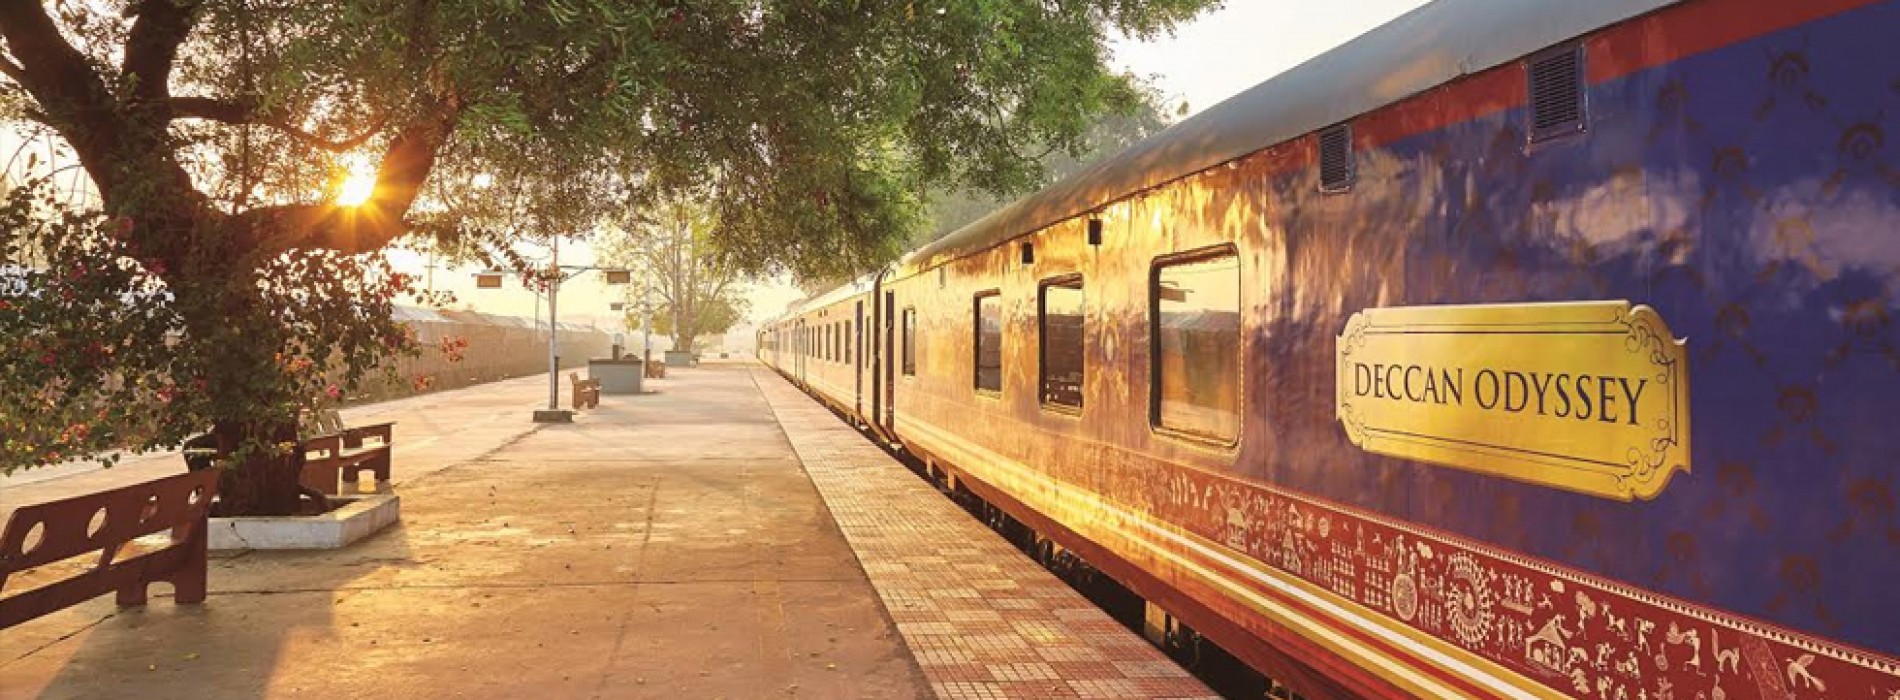 Deccan Odyssey’s Early Bird Offer is here to turn your dream into reality